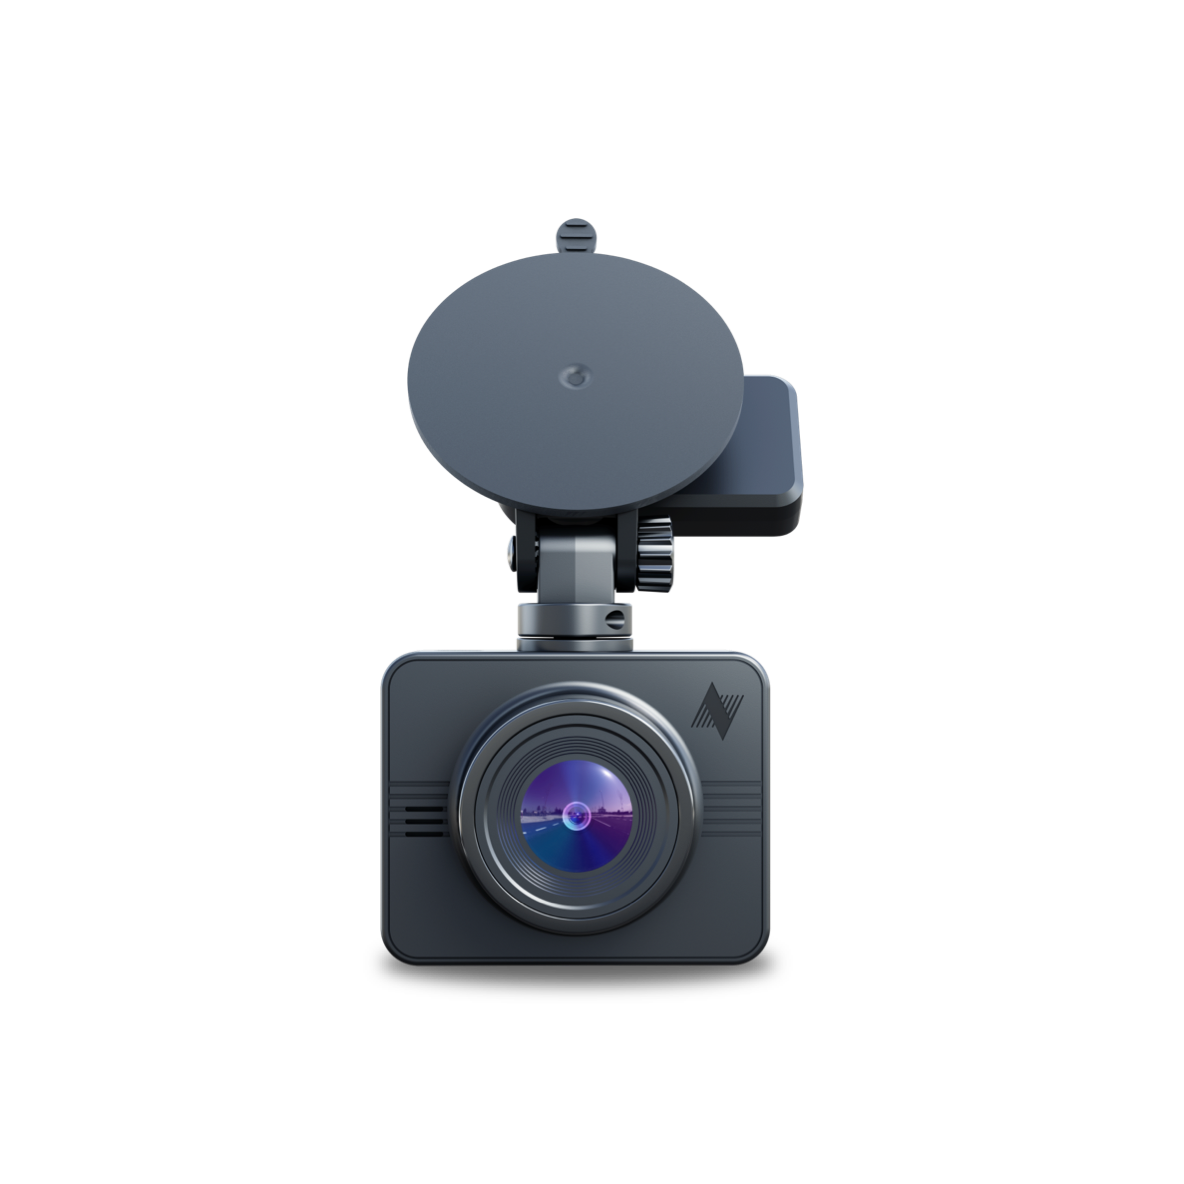 Garmin Dash Cam Live 24/7 Live View Always-Connected with Power Bank